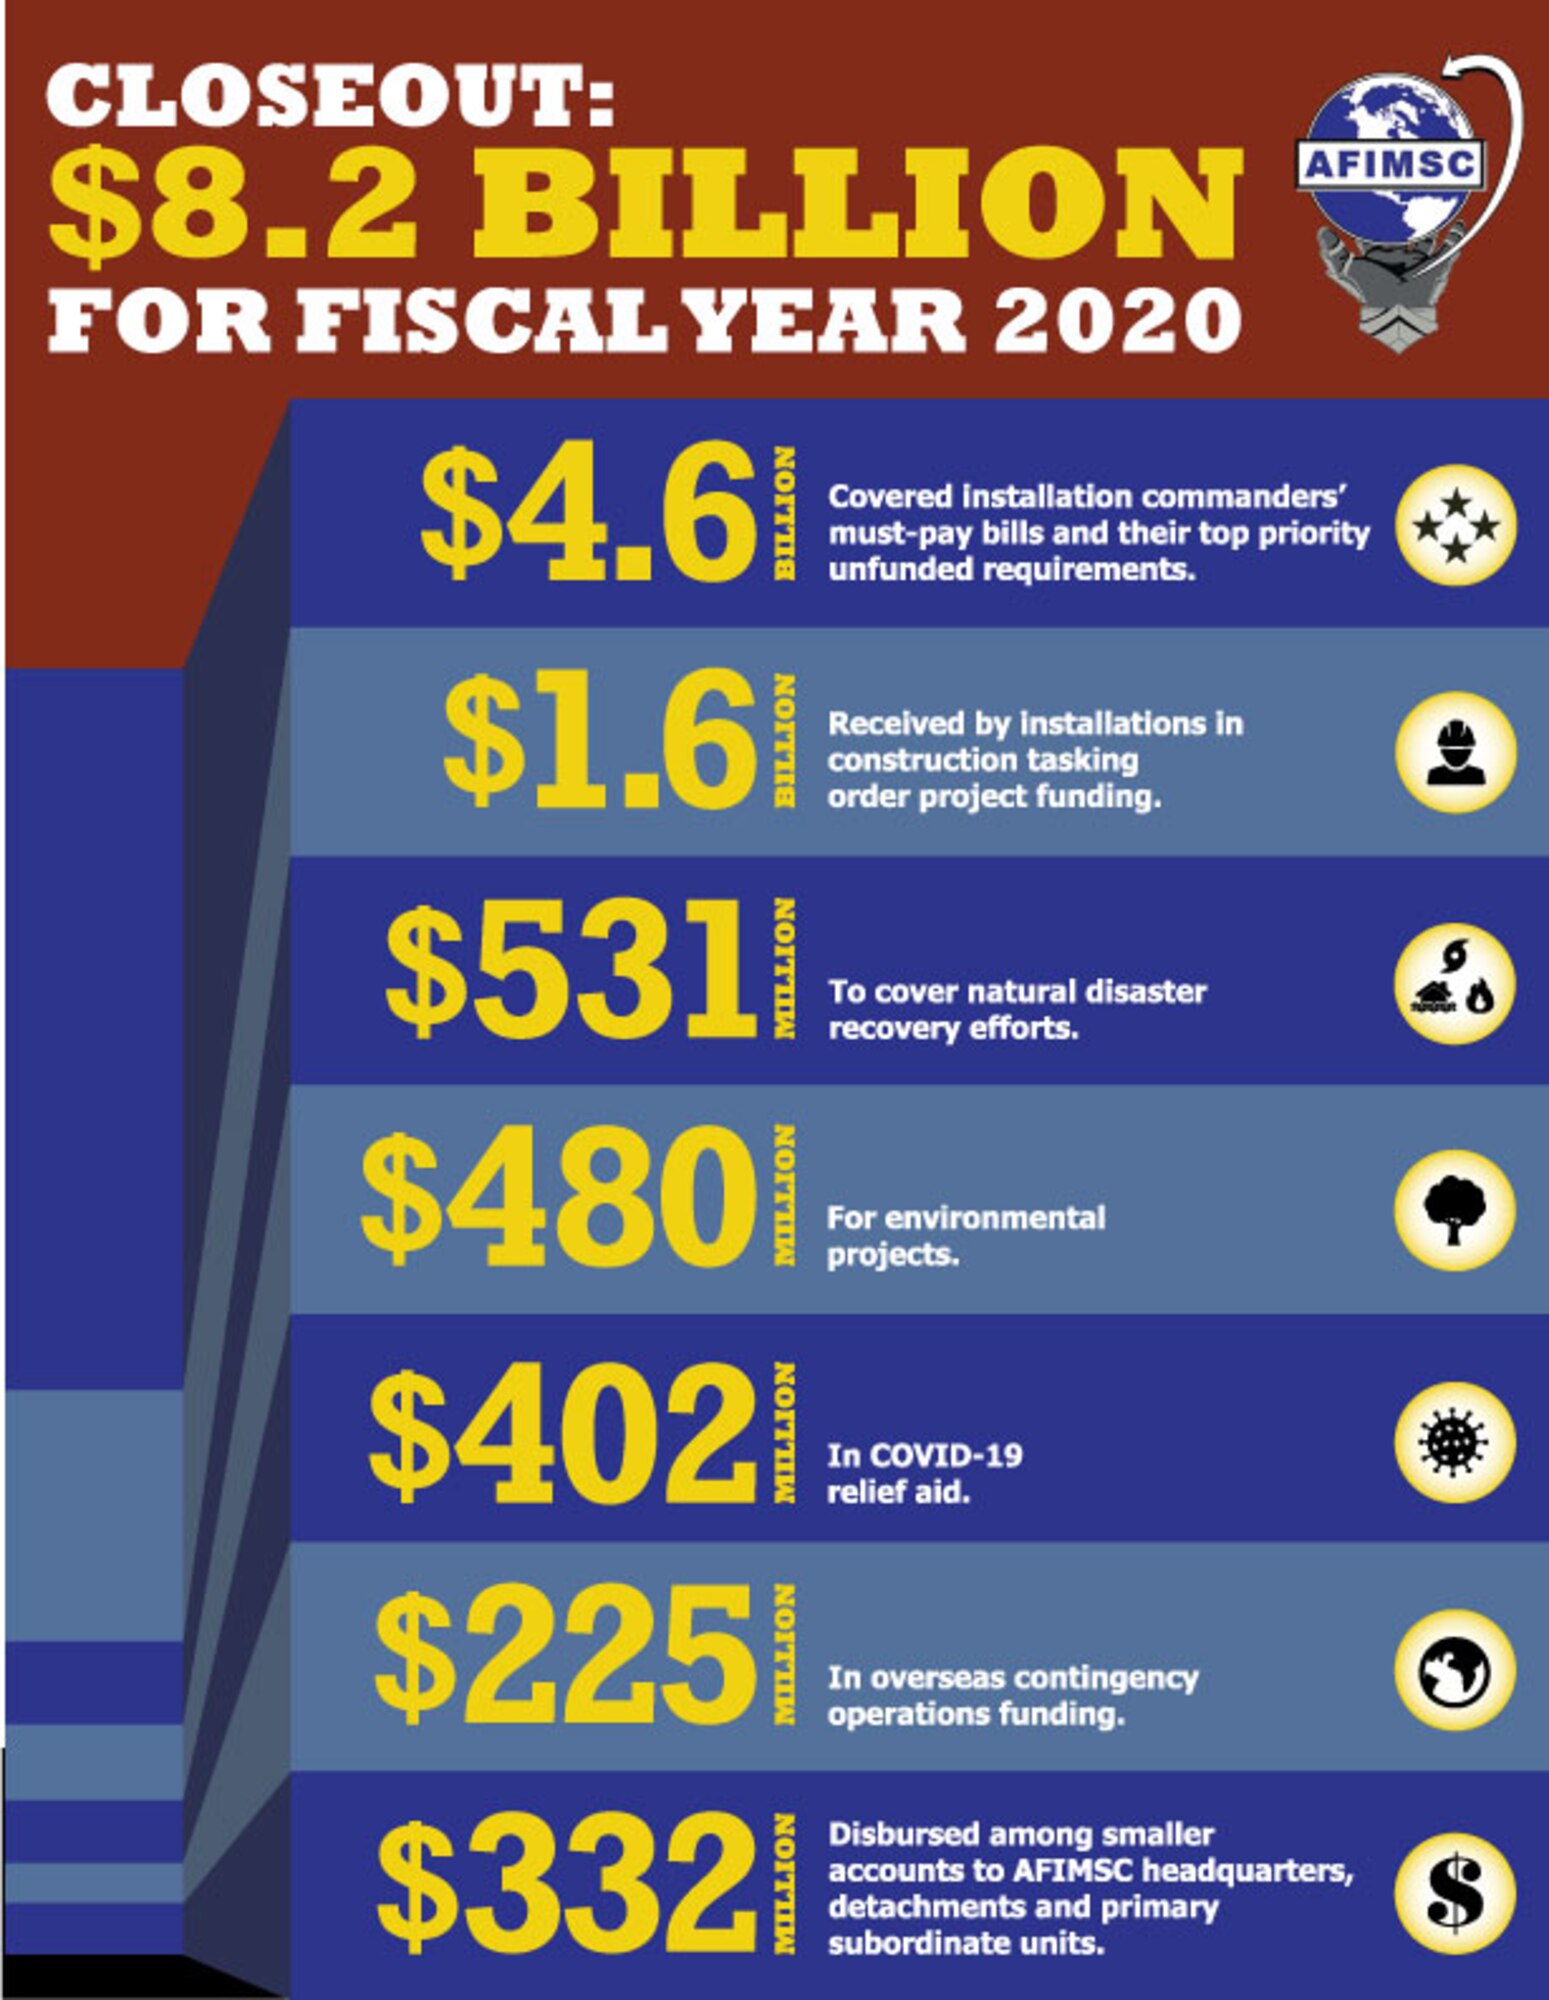 graphic for the $8.2 billion execution by AFIMSC during fiscal 2020.